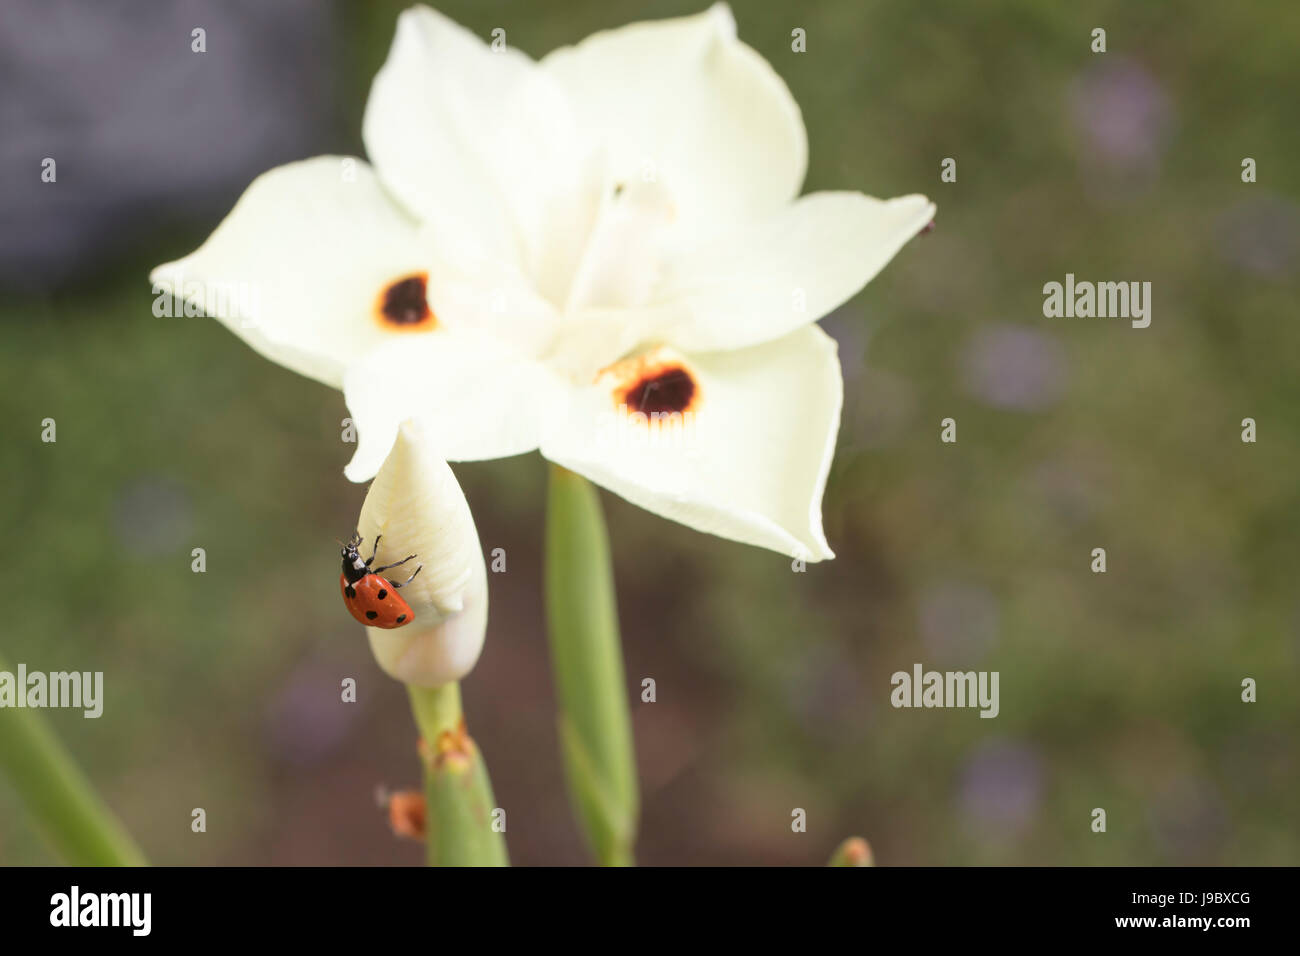 Red and black spotted Ladybug crawling on a yellow Dietes flower in a garden Stock Photo